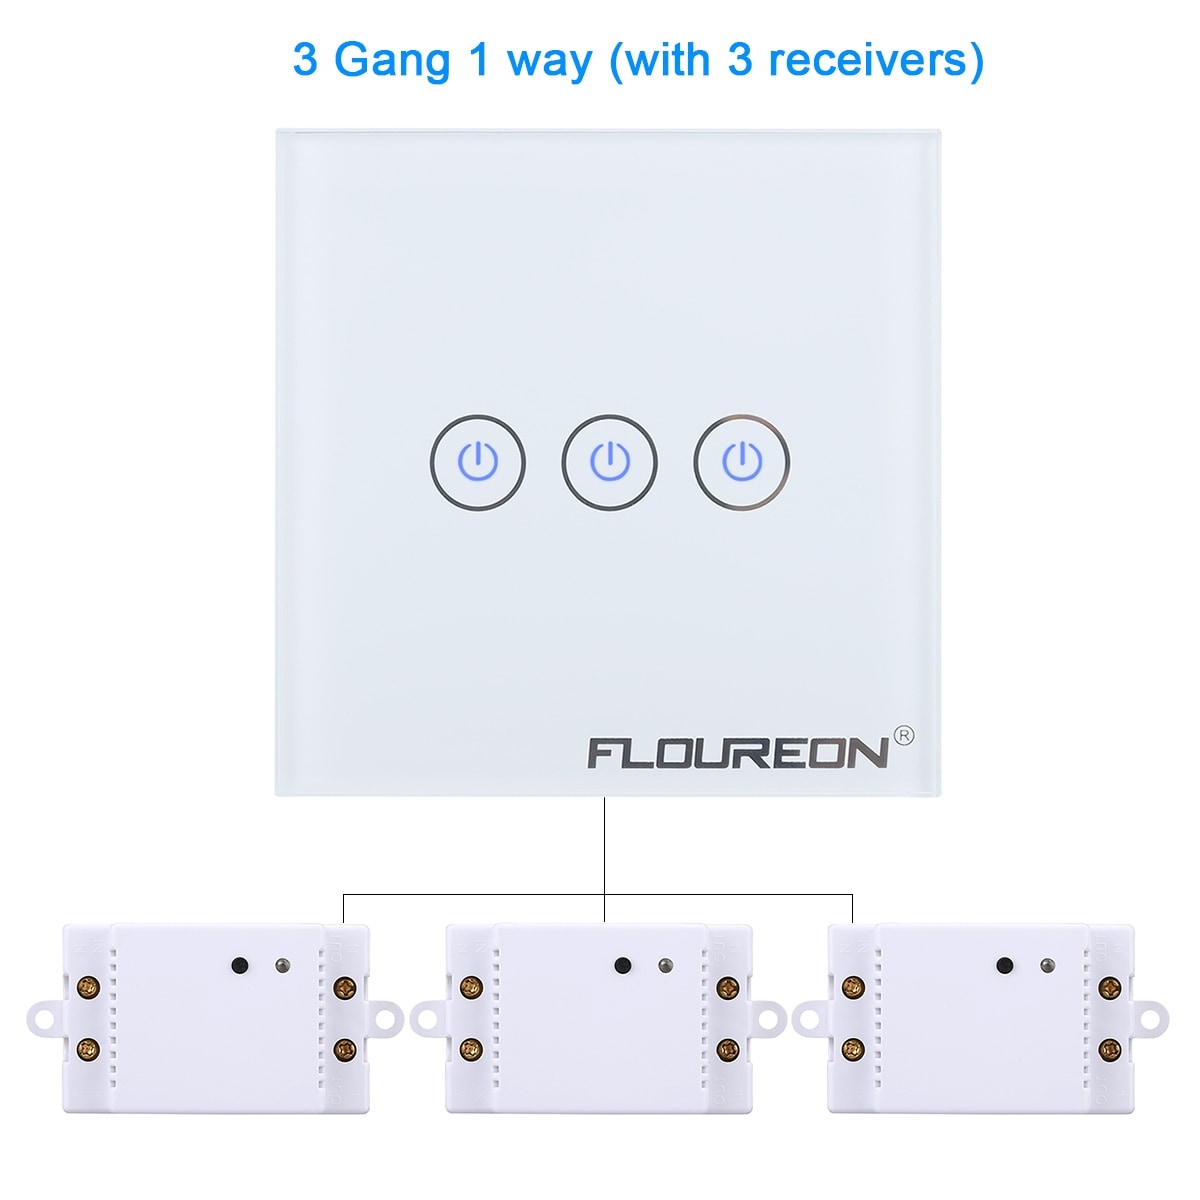 https://ak1.ostkcdn.com/images/products/is/images/direct/1ebef79e36d63de299d2f5bed70a9f82f506d7ba/Floureon-3-Gang-1-Way-Wireless-RF-Remote-Control-Light-Switch-433.92MHz-Remote-Controller-Portable-Switch.jpg